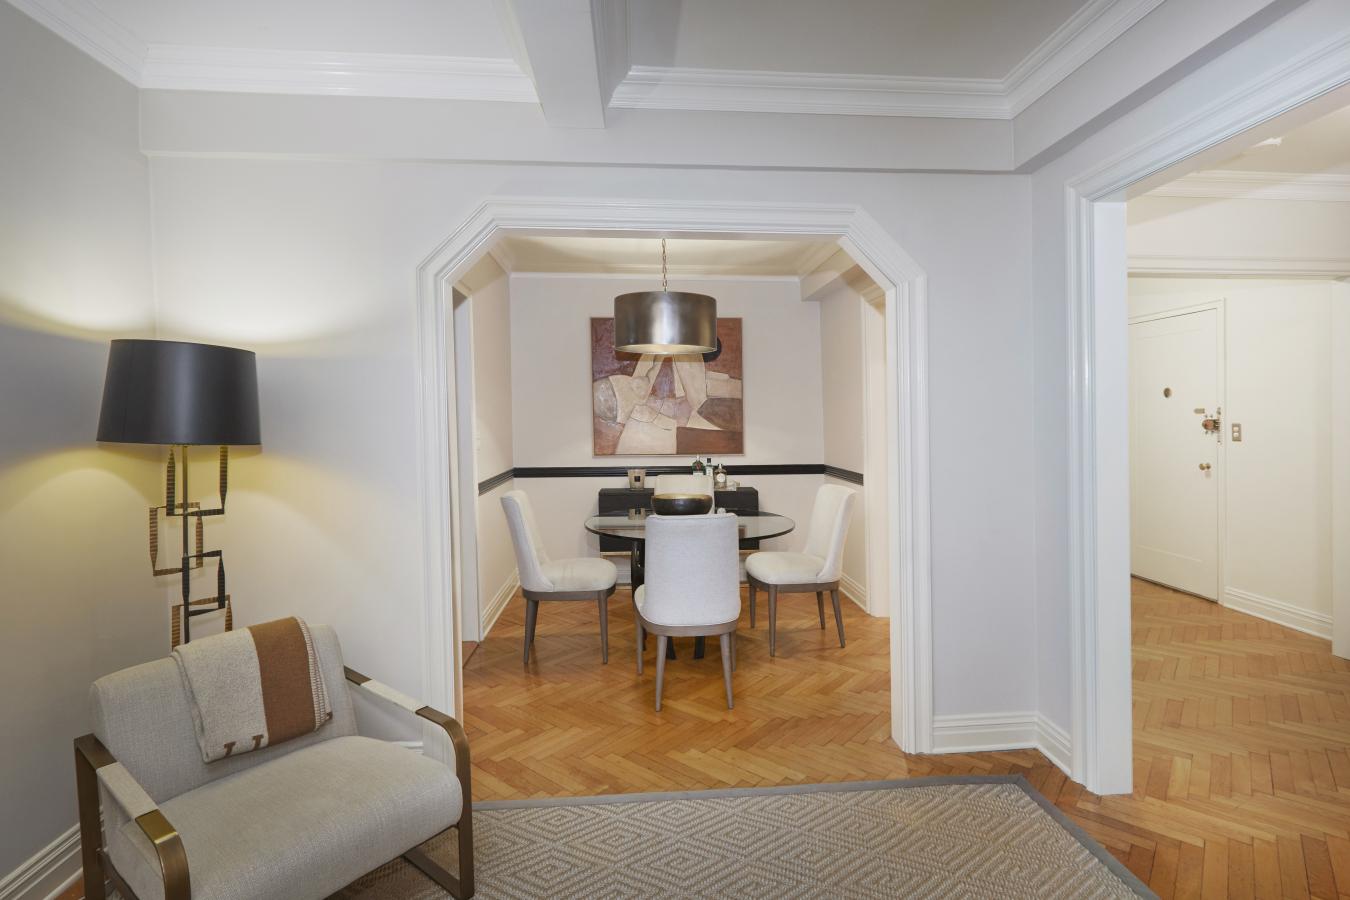 177 EAST 77TH STREET, New York, New York, 10075, United States, 2 Bedrooms Bedrooms, ,1 BathroomBathrooms,Residential,For Sale,177 east 77th ST,1465410